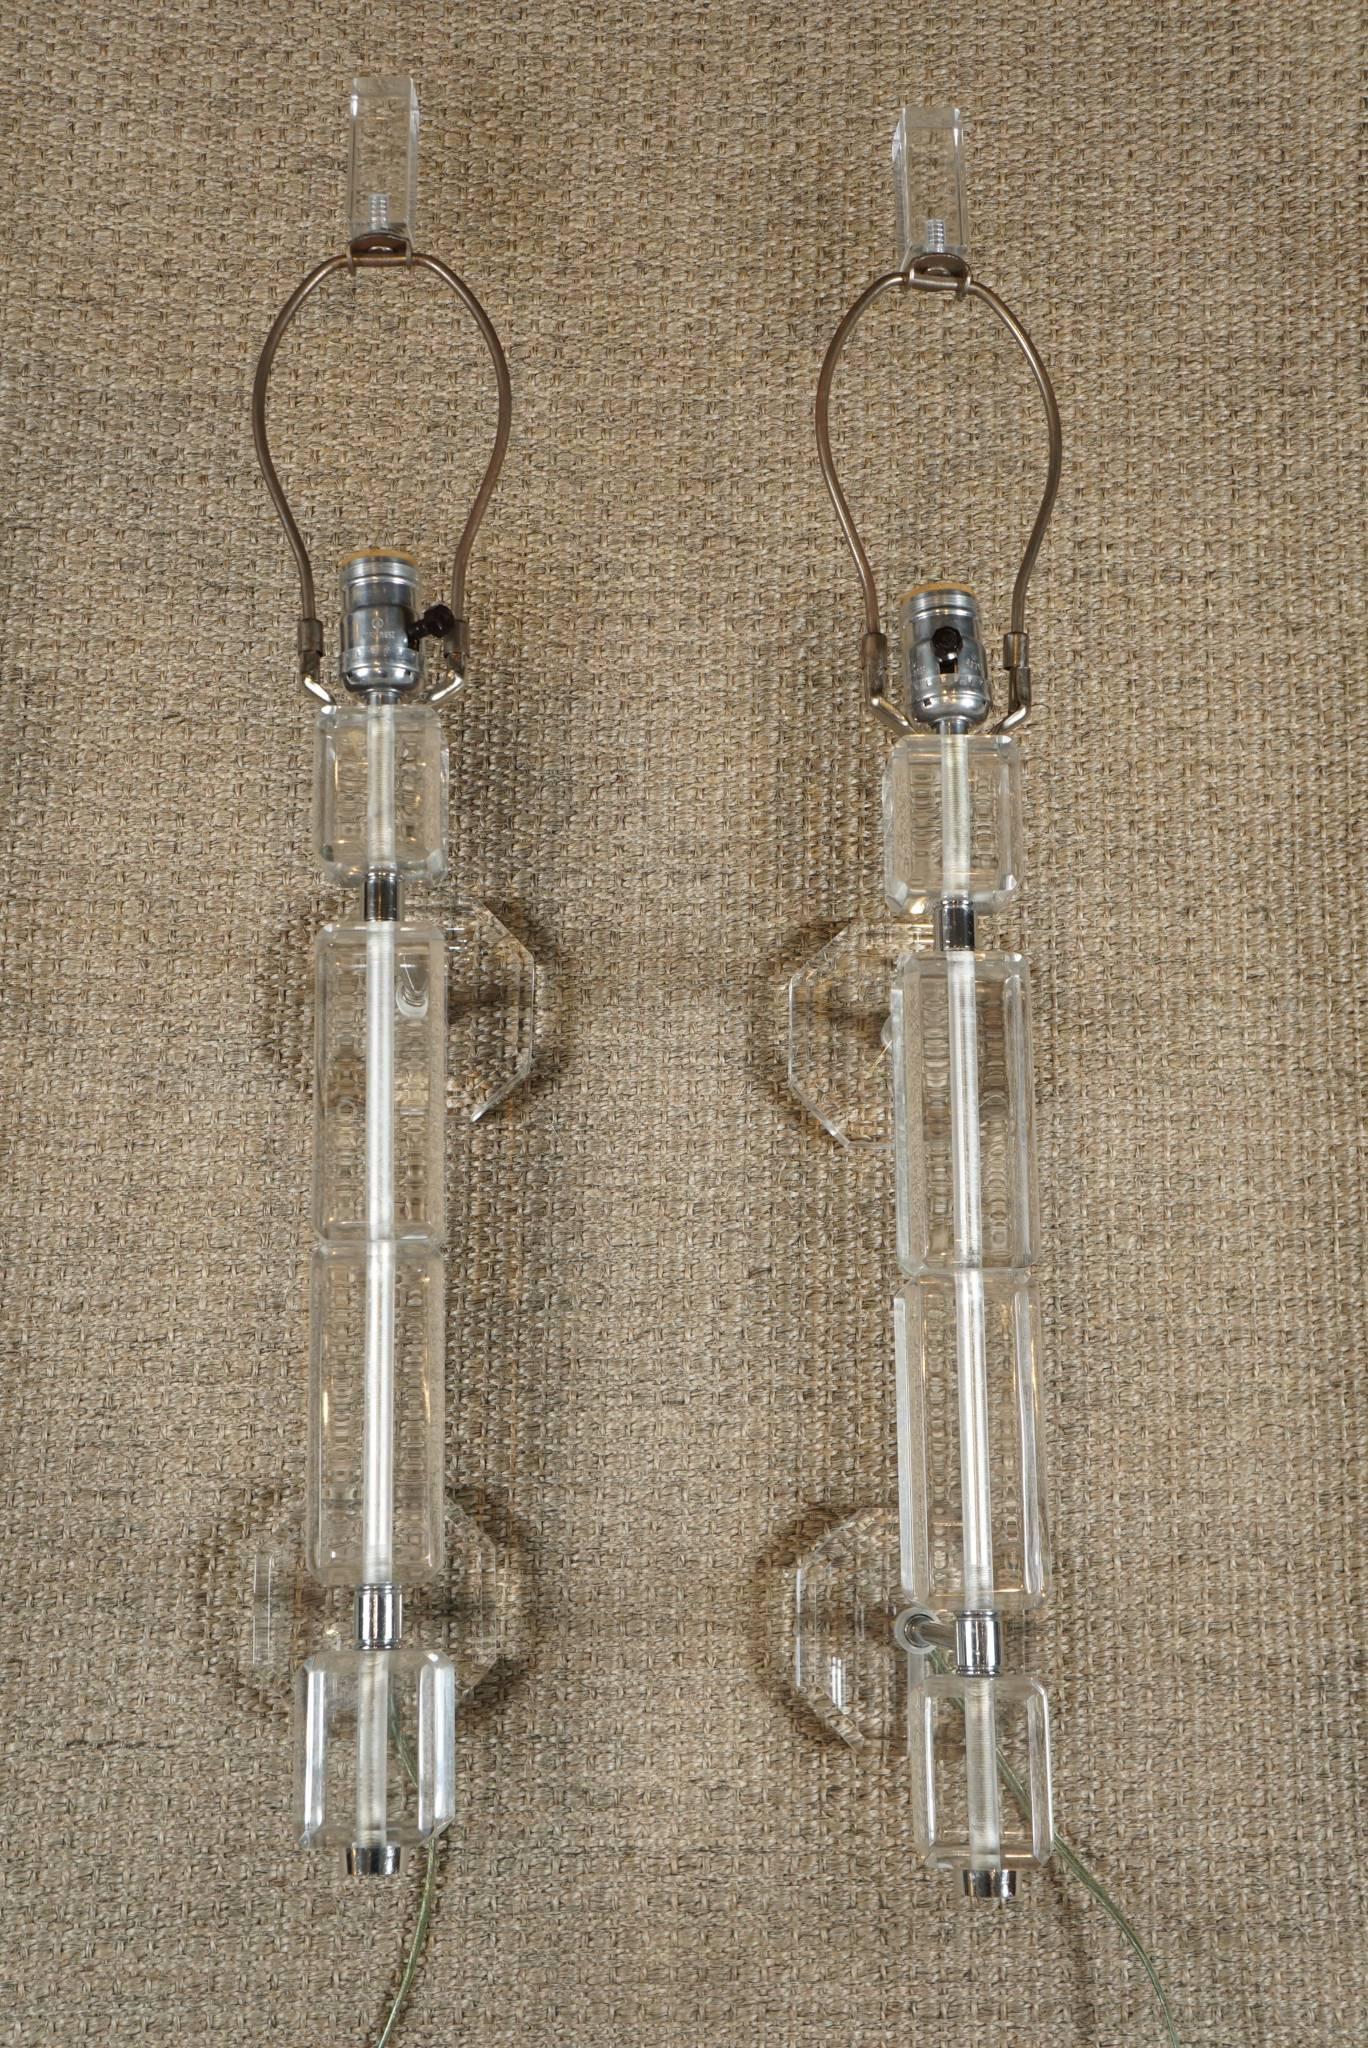 Here is a pair of elongated Lucite wall sconces. The lamps are wired to plug in but can be modified for a wall socket. There are built in brackets to attach to the wall. The lamps have harps and finials for shades and take standard light bulbs.
The